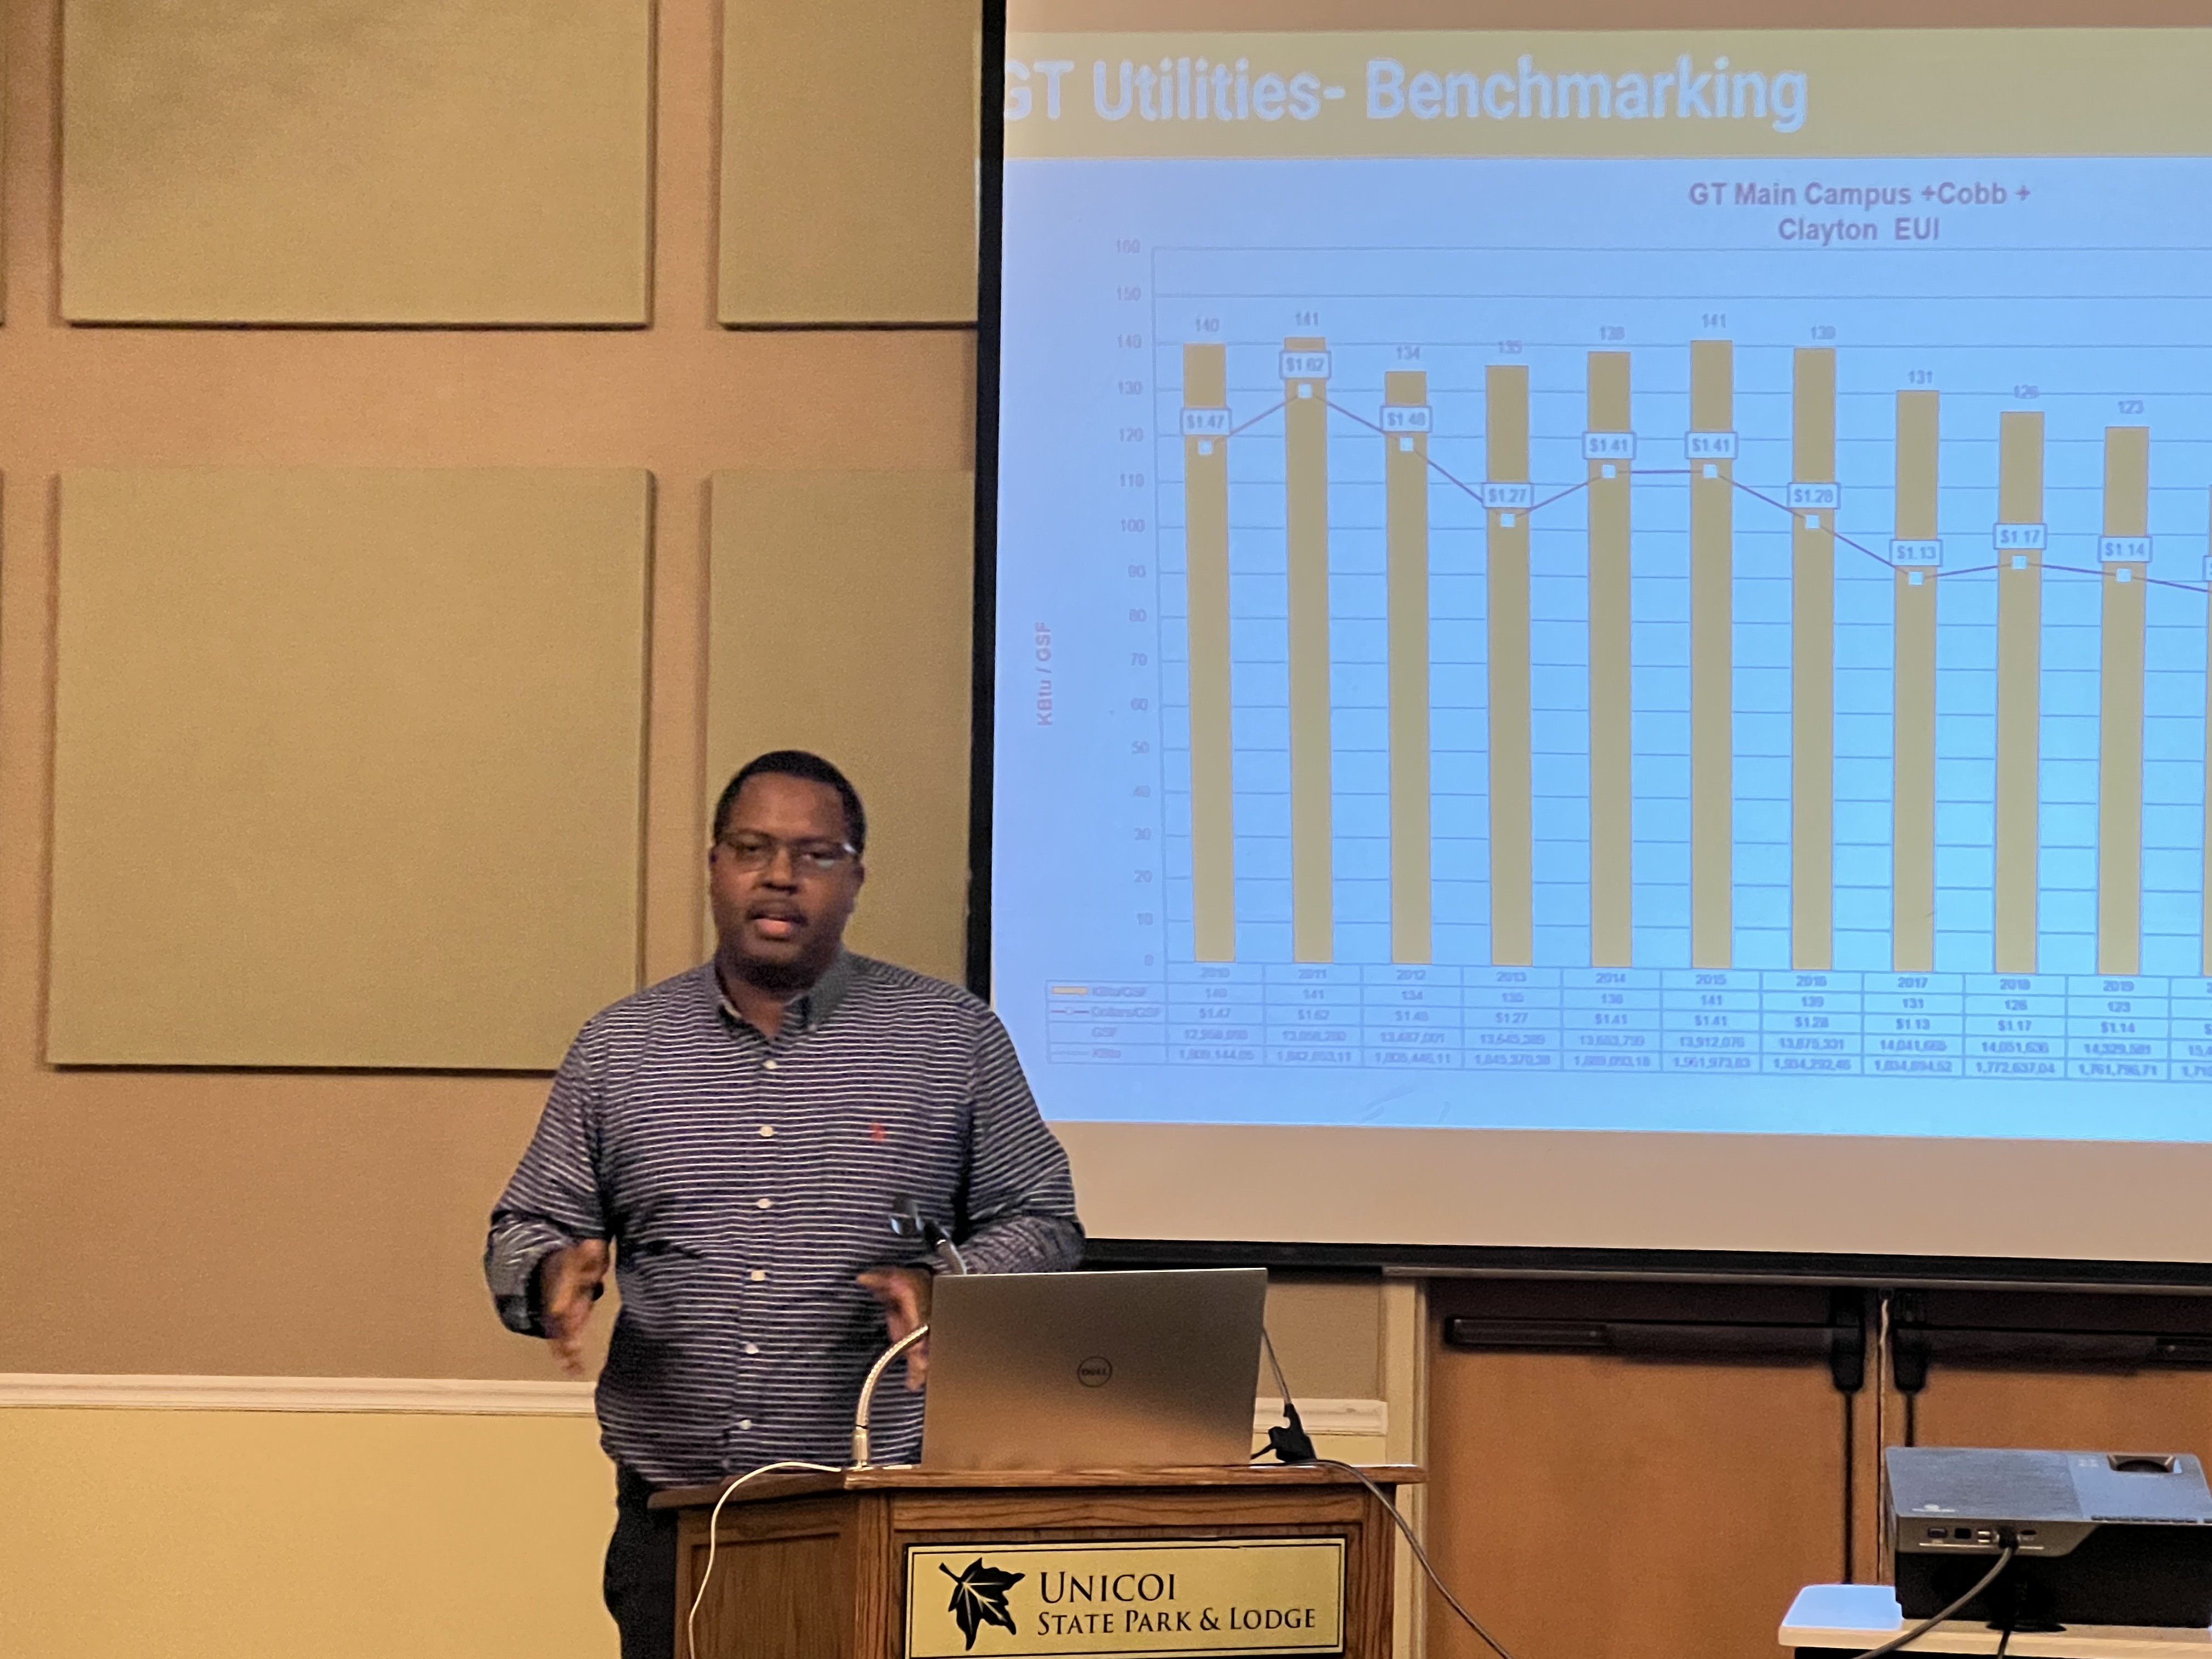 Jermaine Clonts, Presenting at a wooden podium with a graph behind him on the screen displaying utilities benchmarking.